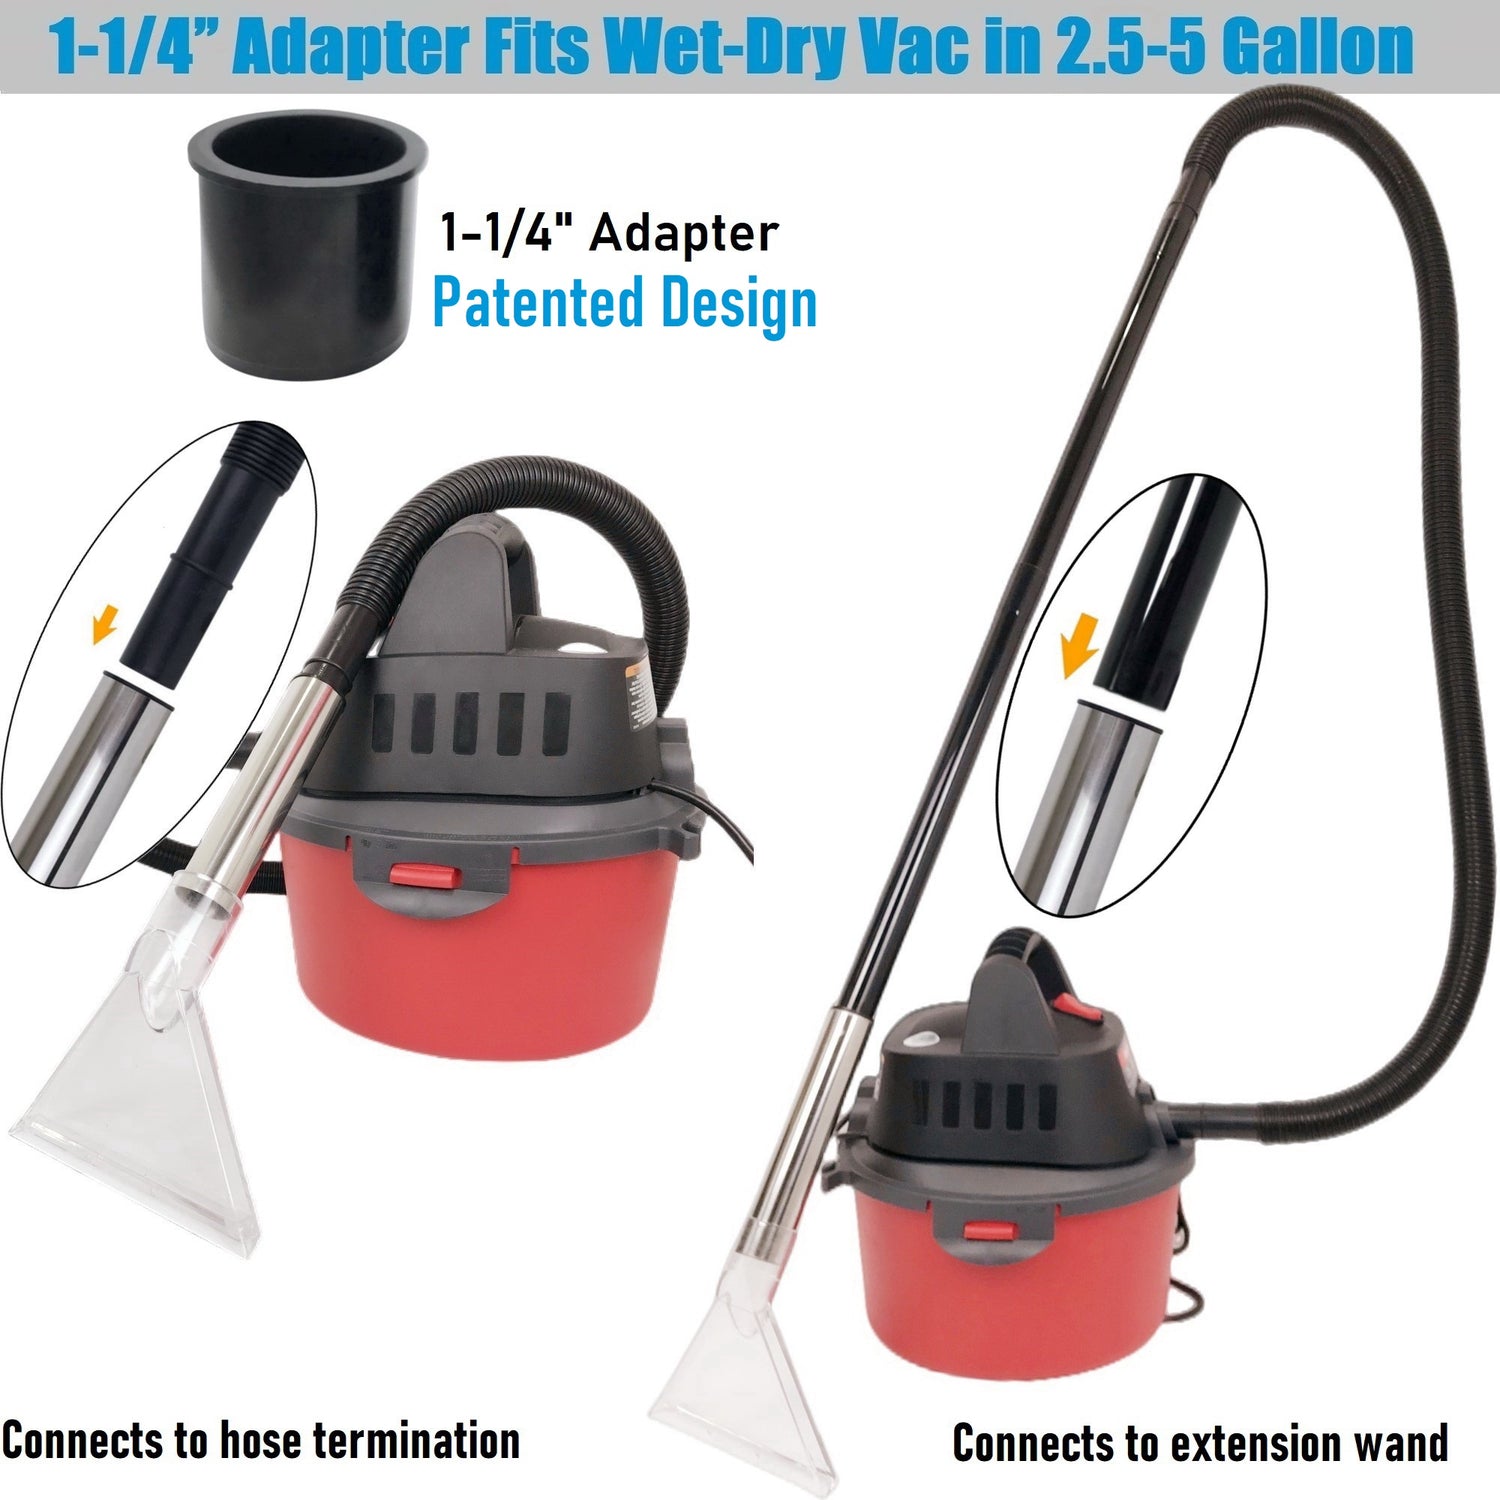 For European Market, Fits All Wet Vacuums Cleaners, 19cm Width Extract –  HAPPY TREE CLEAN